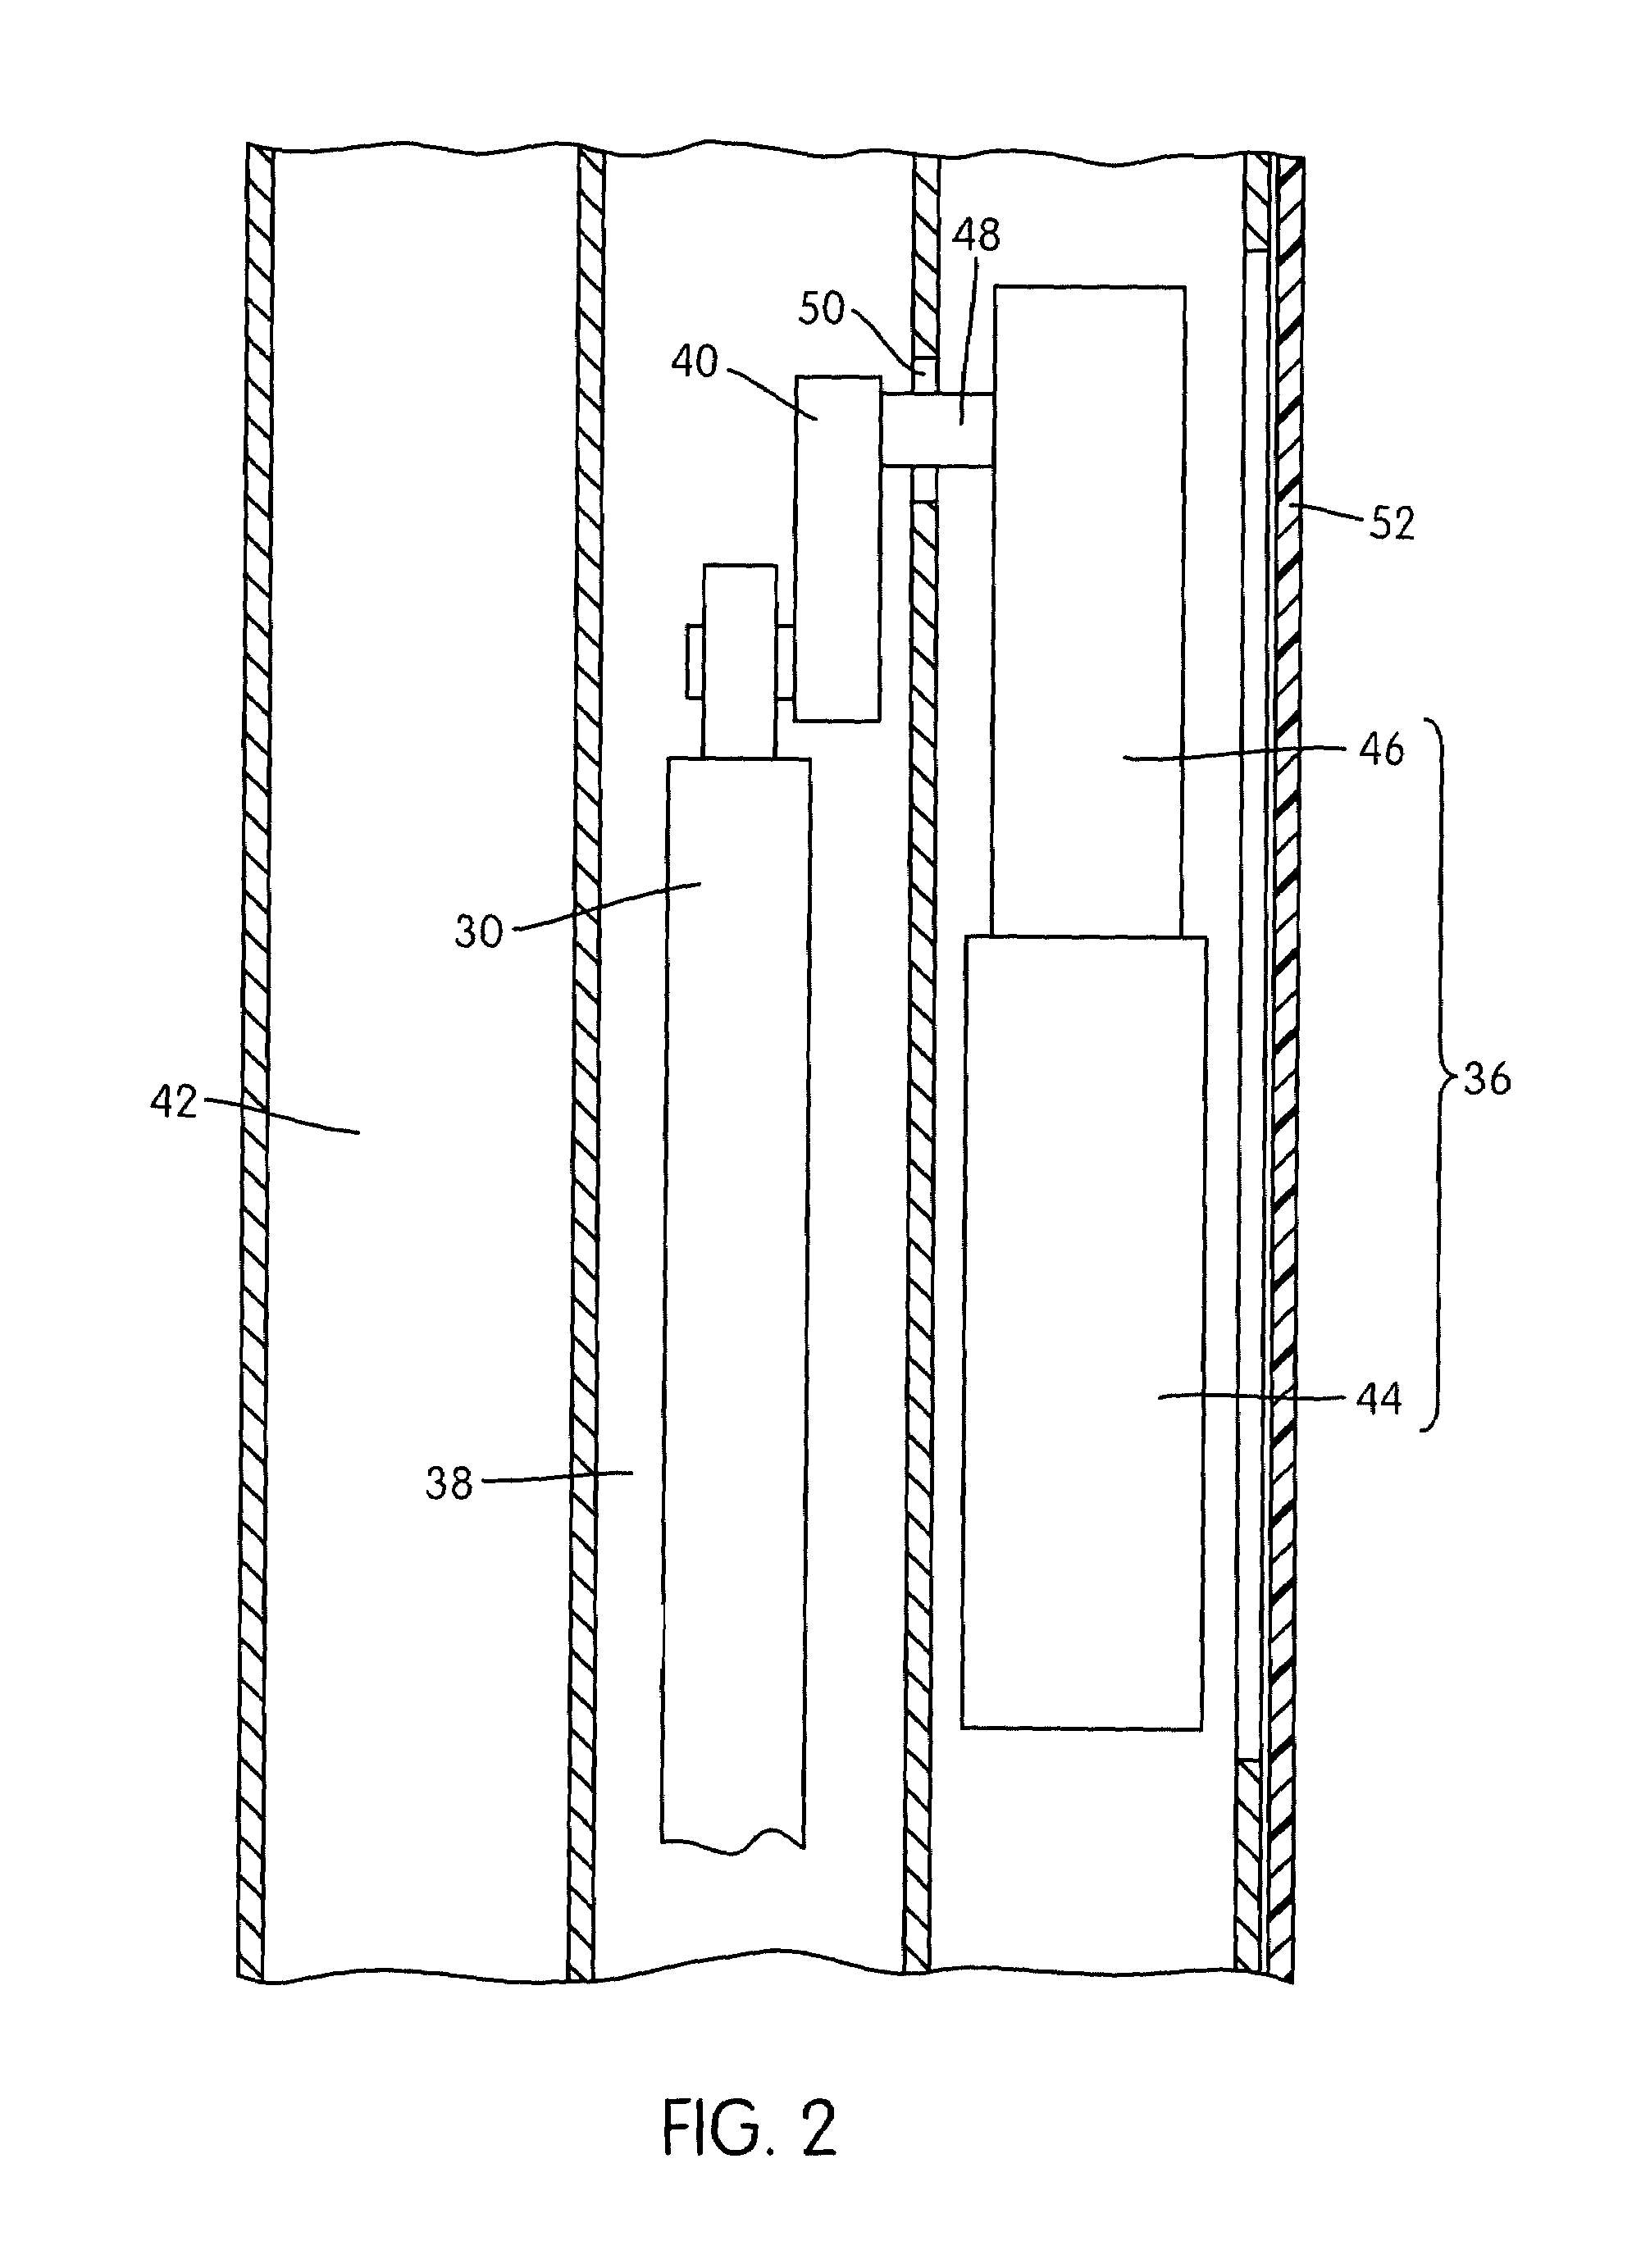 Powered opening mechanism and control system